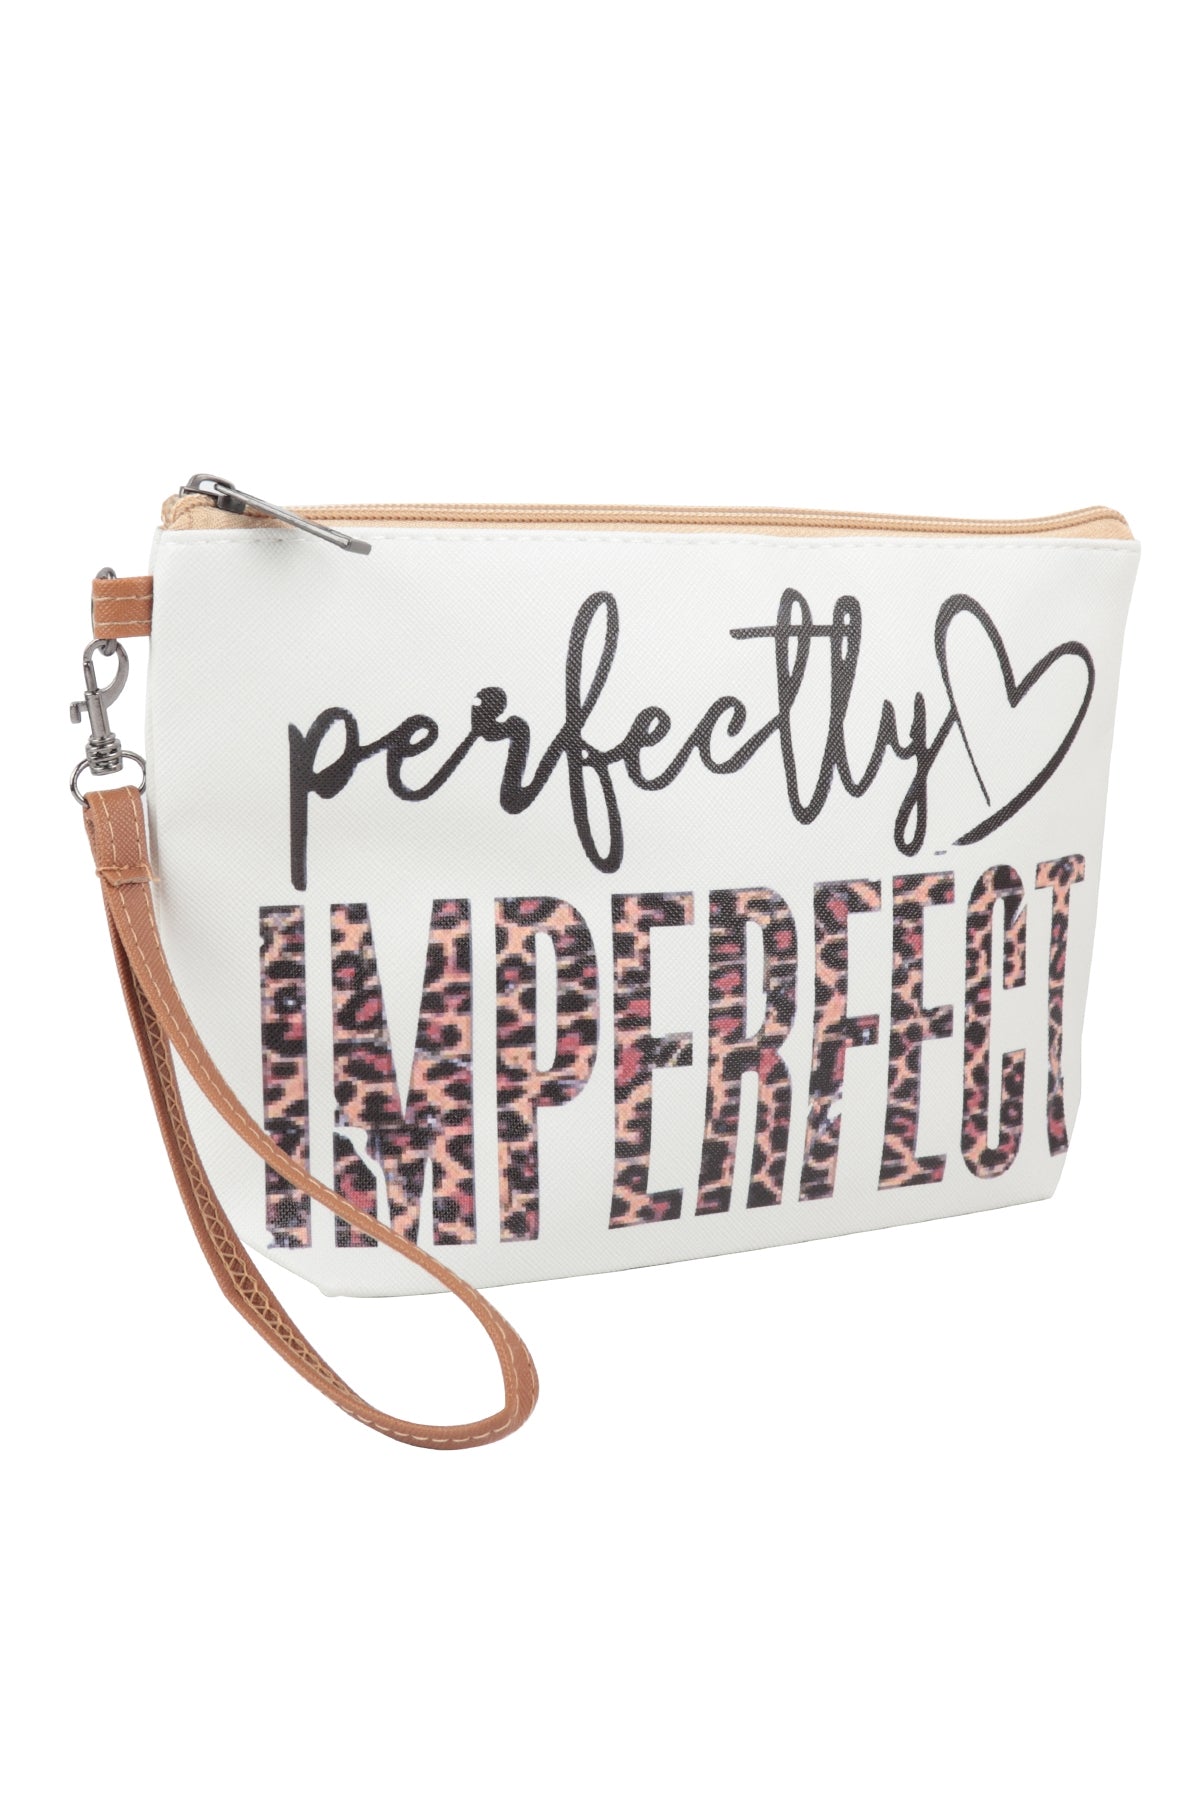 PERFECTLY IMPERFECT PRINT COSMETIC POUCH BAG W/ WRISTLET/6PCS